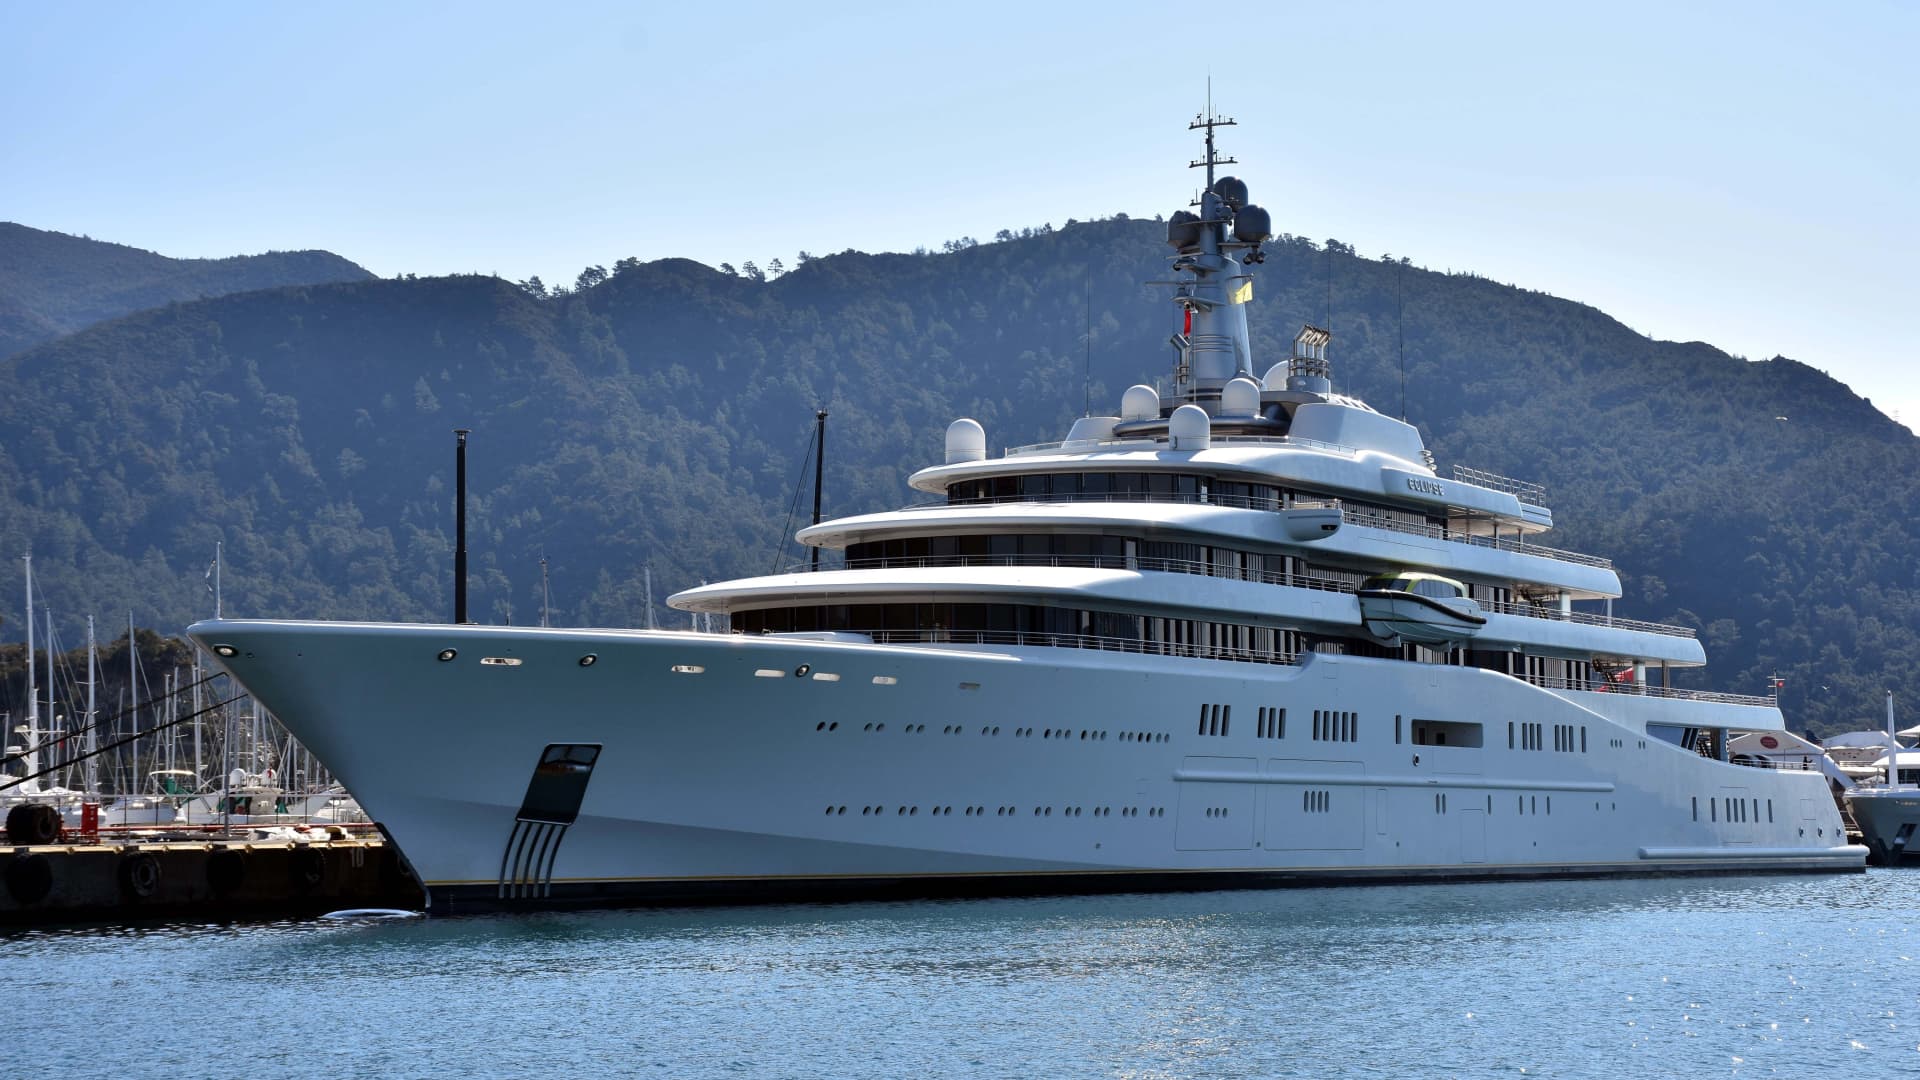 Eclipse, the private luxury yacht of Russian billionaire Roman Abramovich, anchors at Cruise Port in Marmaris district of Mugla, Turkey on March 22, 2022.